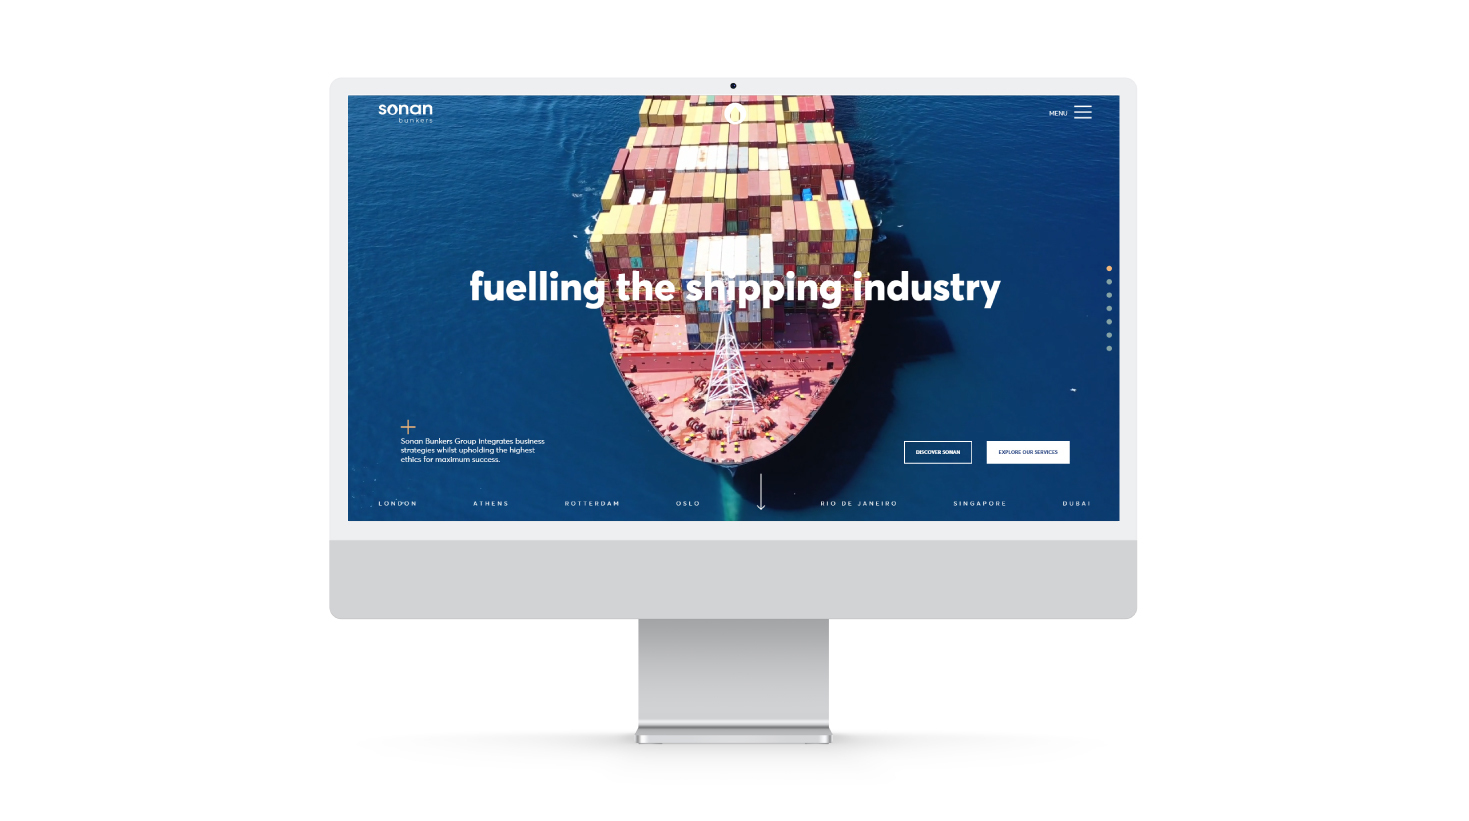 The website's landing page SHIPPING